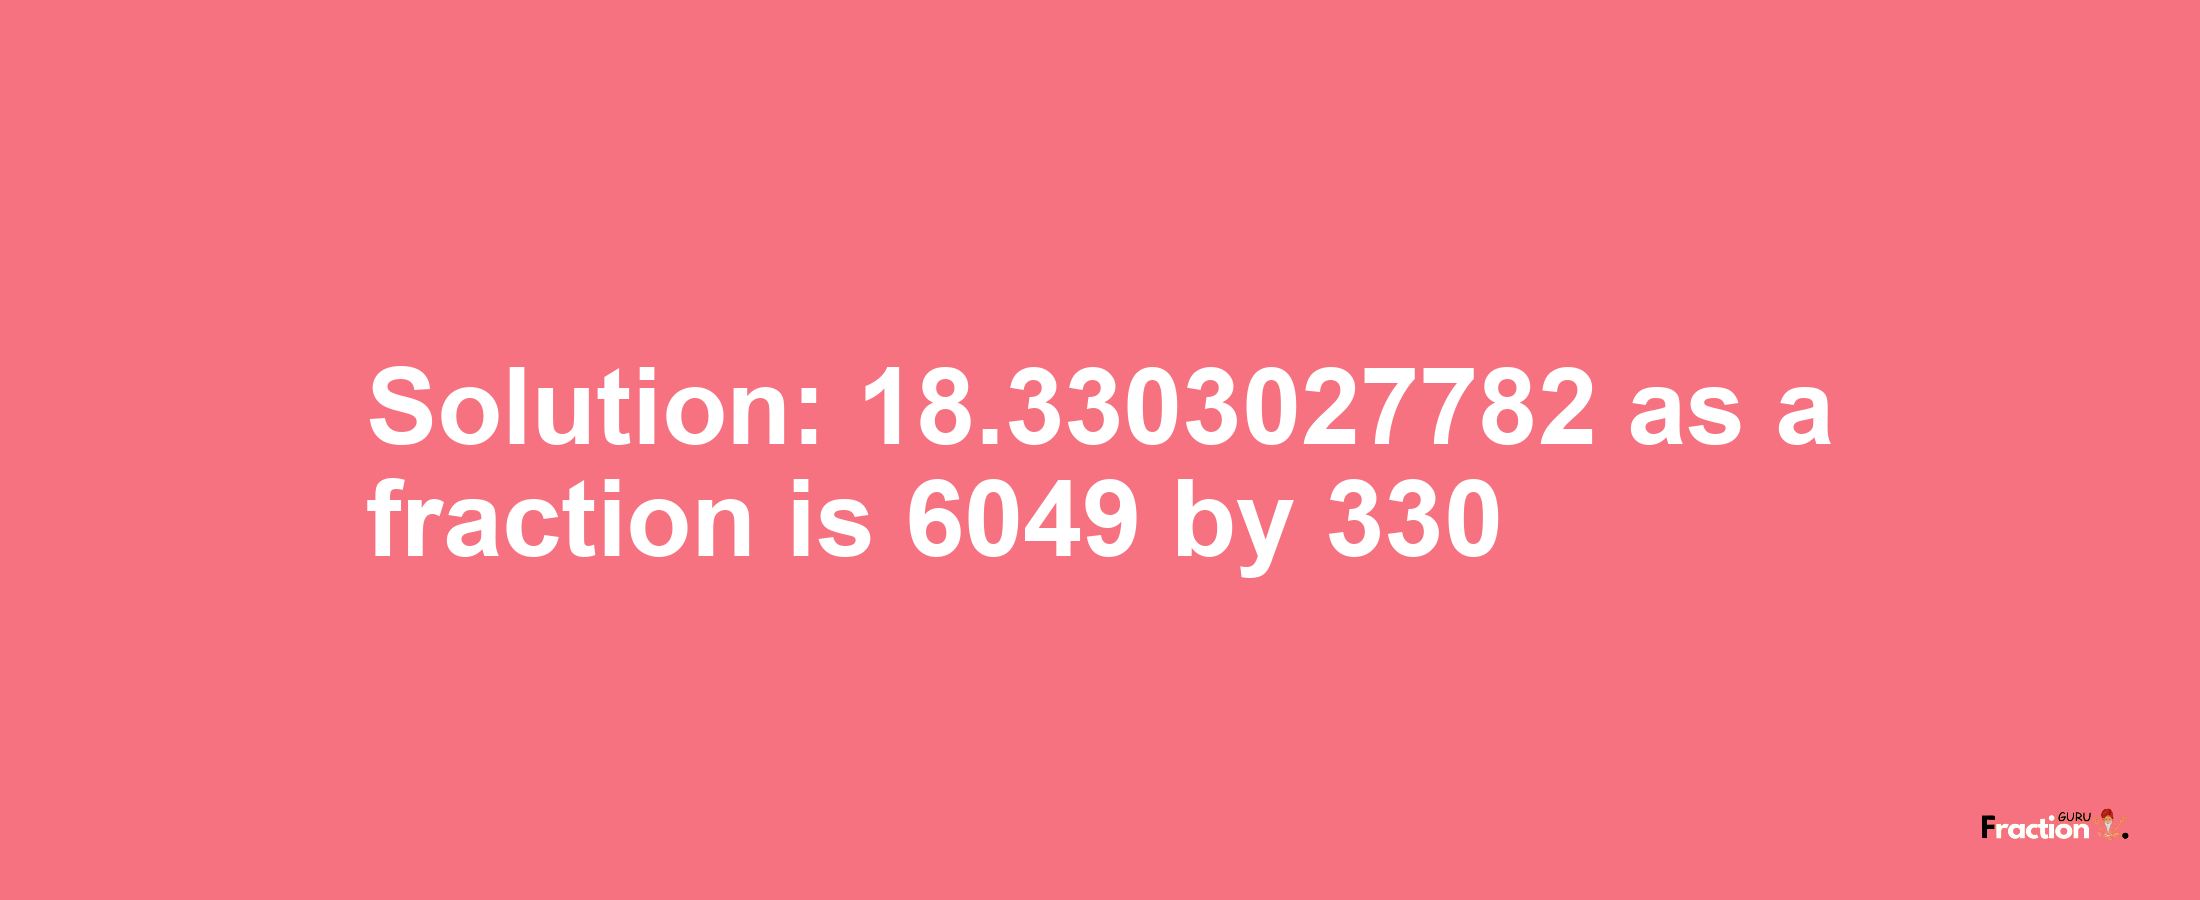 Solution:18.3303027782 as a fraction is 6049/330